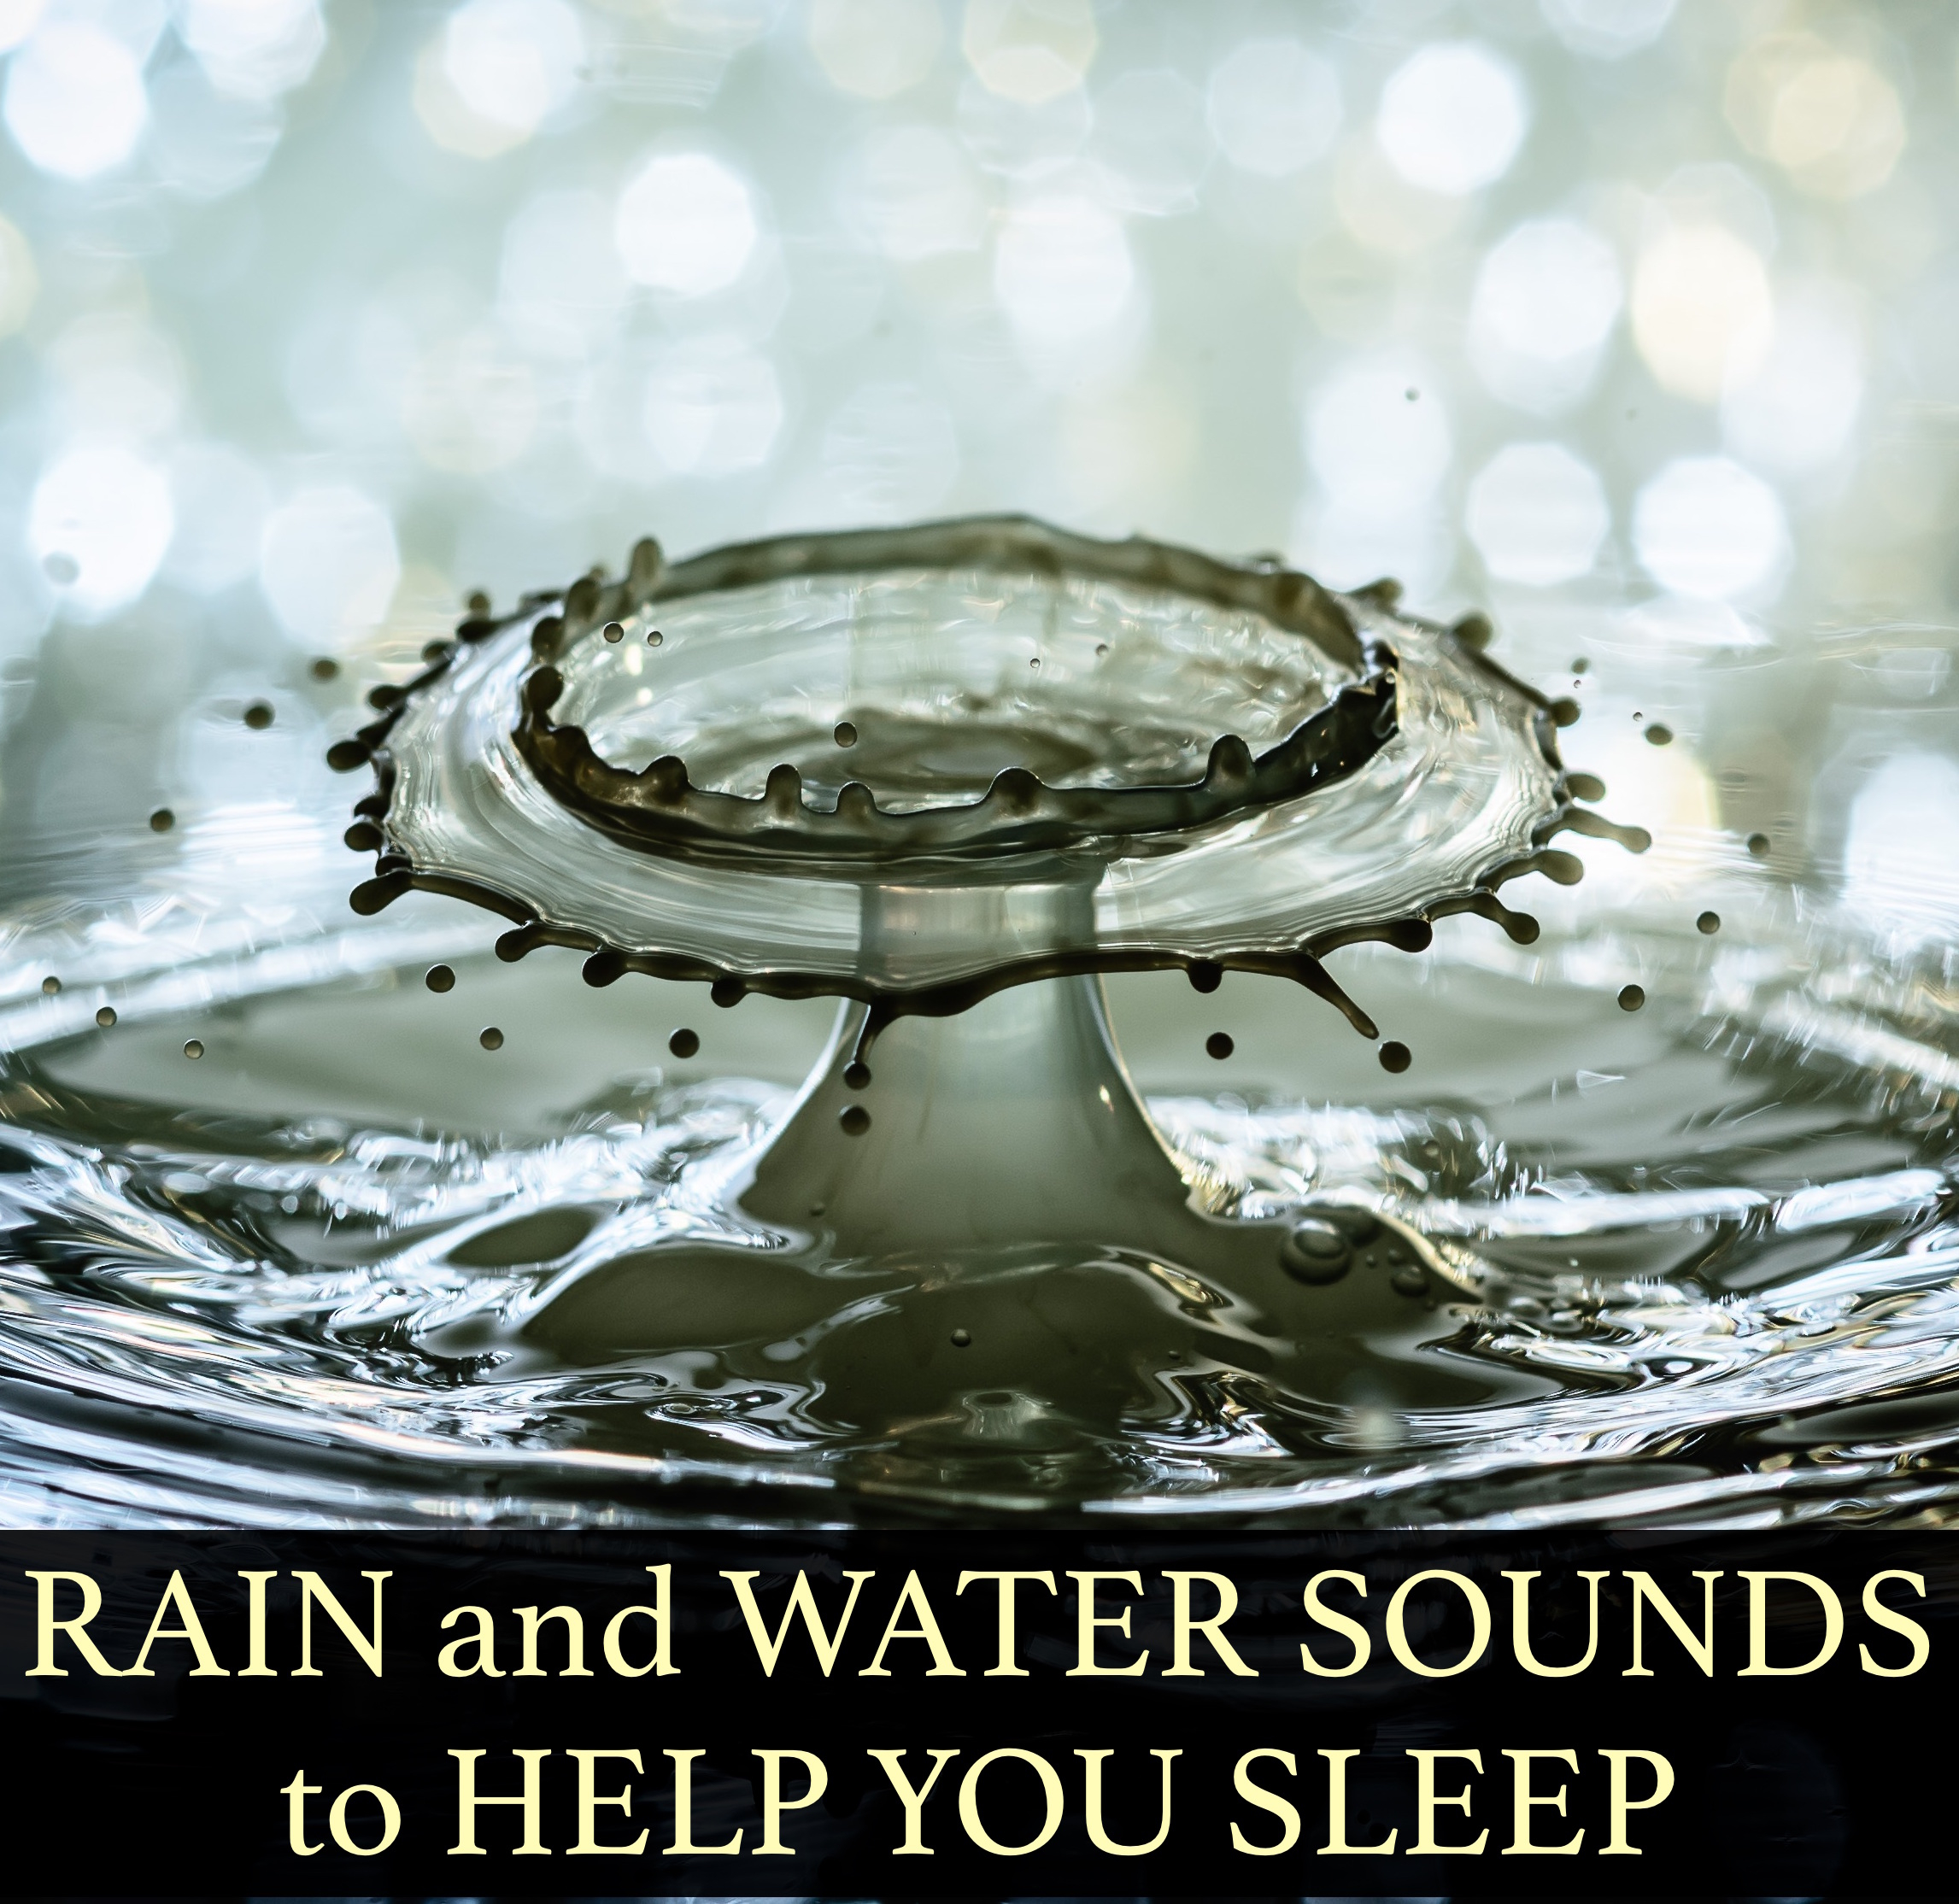 Drops from Heaven - Rain and Water Sounds to Help You Meditate and Sleep Better, and to Promote Healthy Stress-Free Living and Study Success through Mindfulness and Relaxation